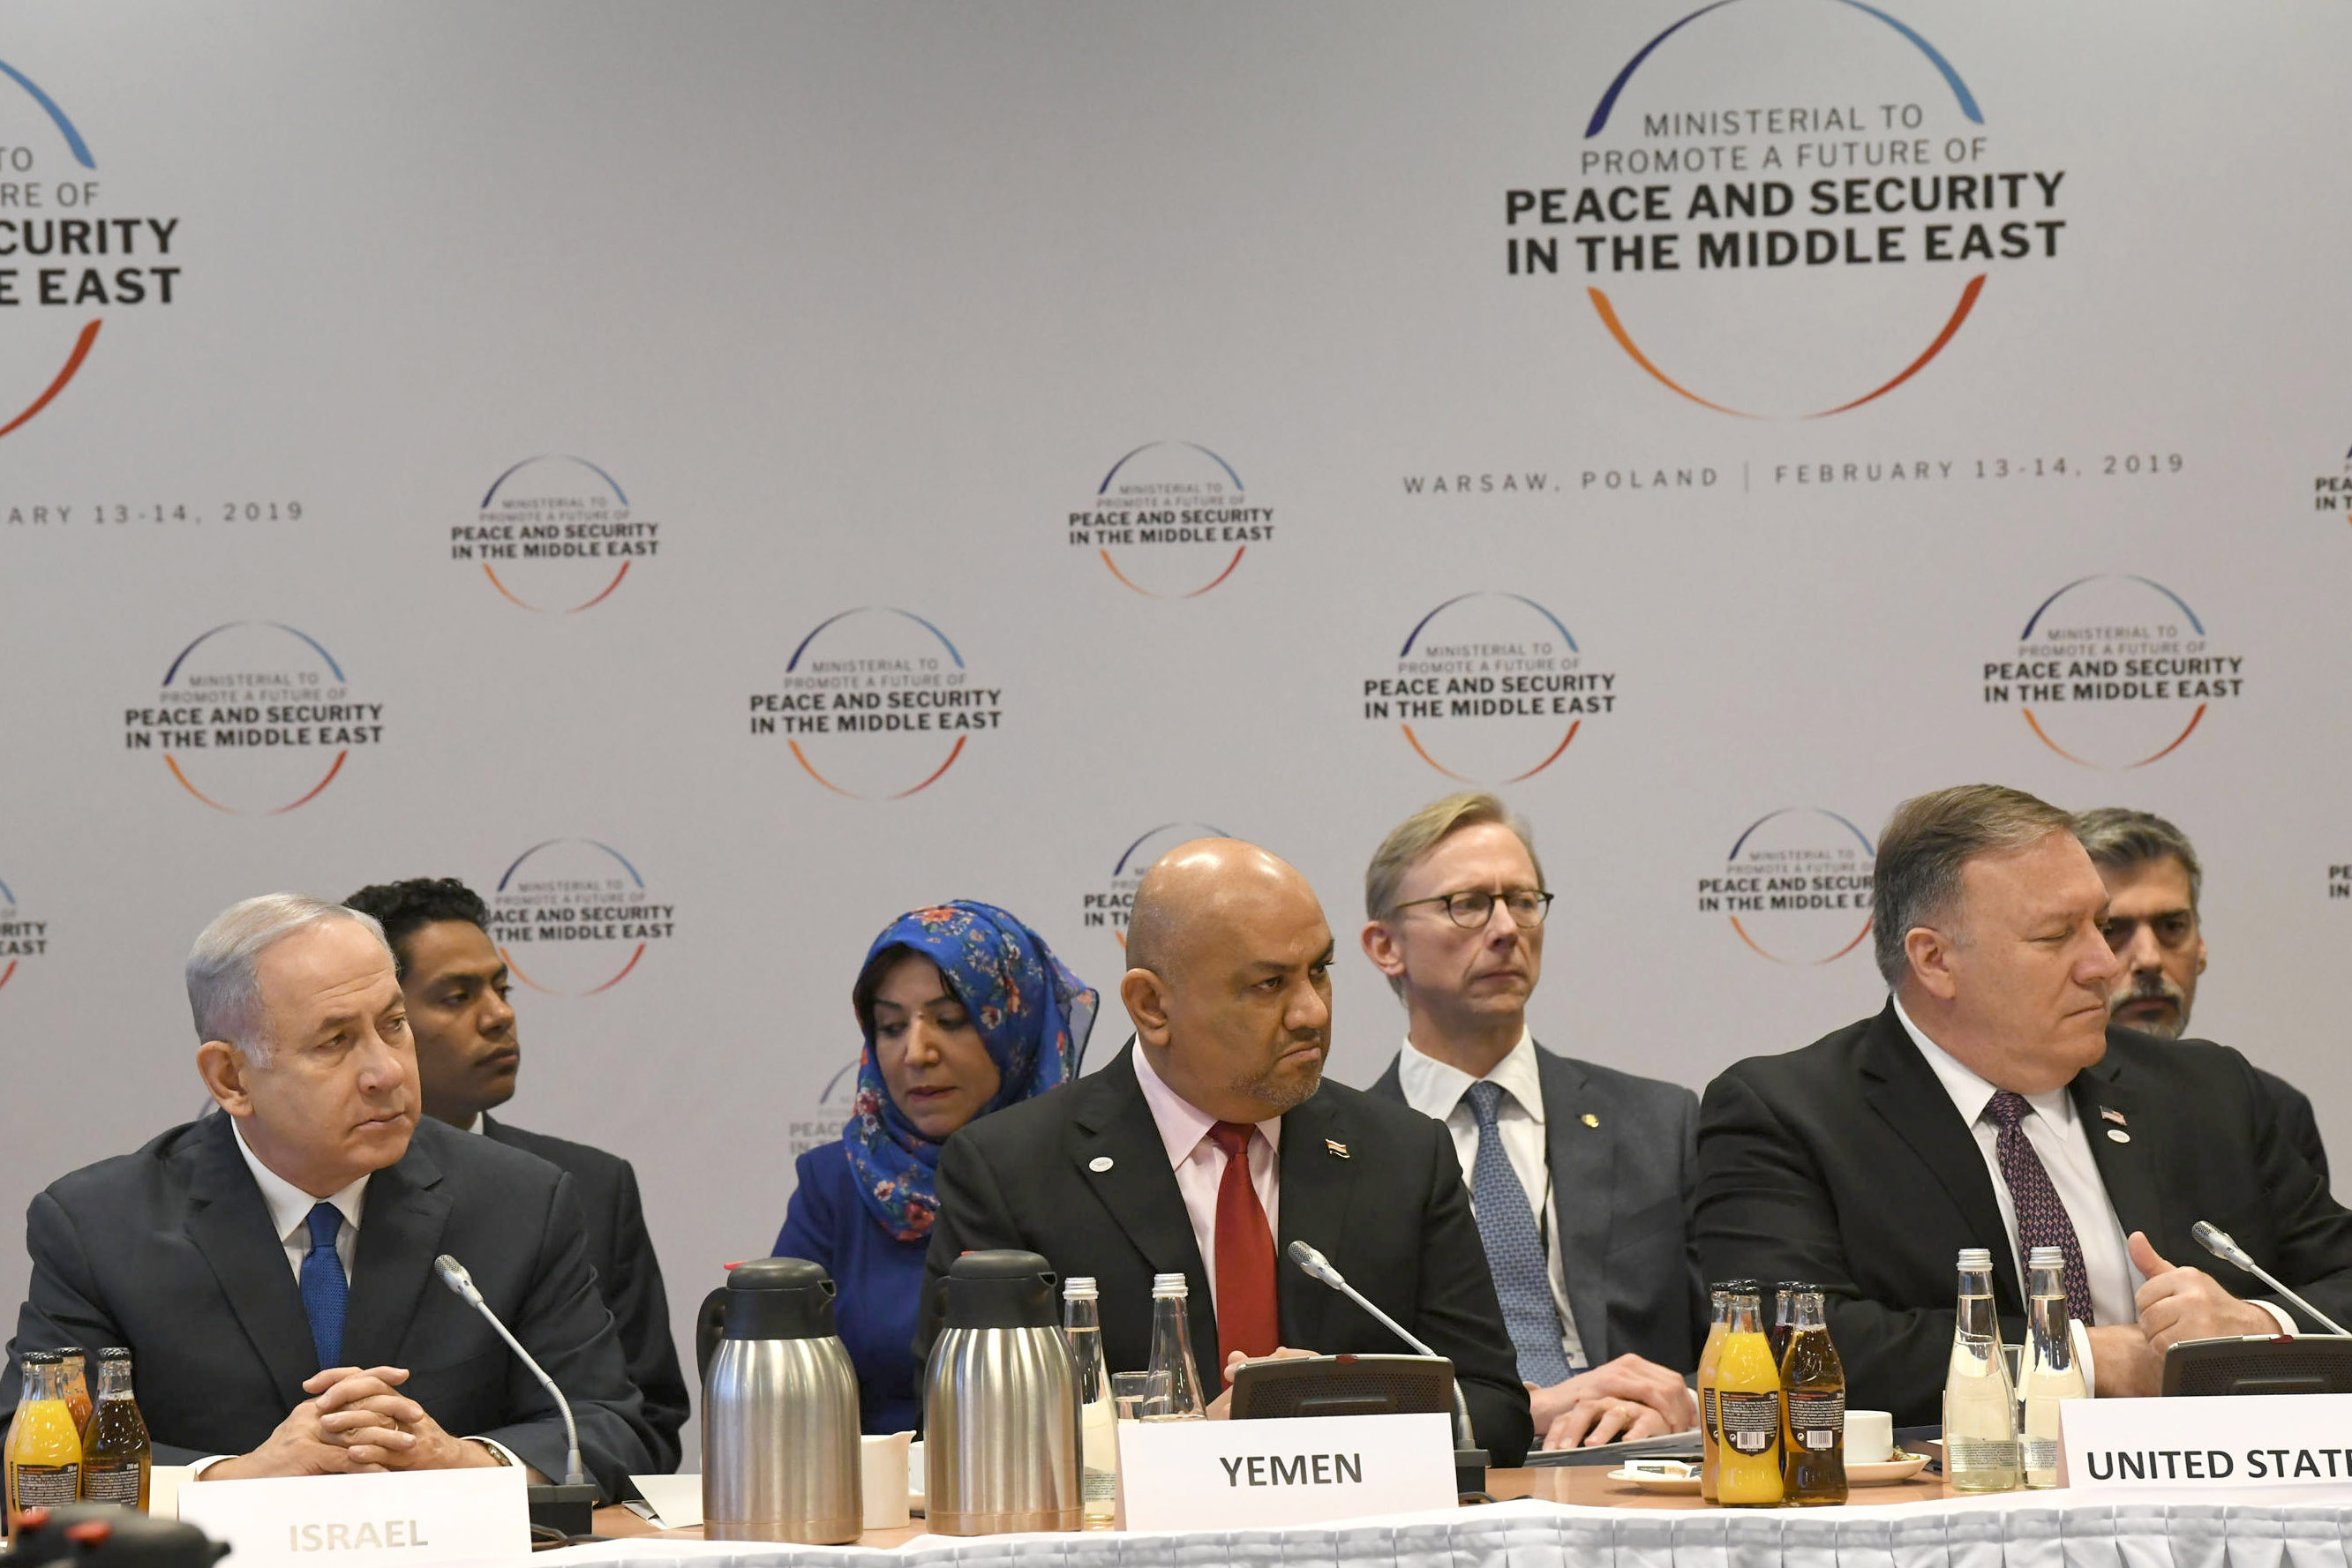 Israeli Prime Minister Benjamin Netanyahu (L-R), Minister of Foreign Affairs of Yemen Khaled al-Yamani, and US Secretary of State Mike Pompeo attend the Warsaw Peace and Security in the Middle East conference.